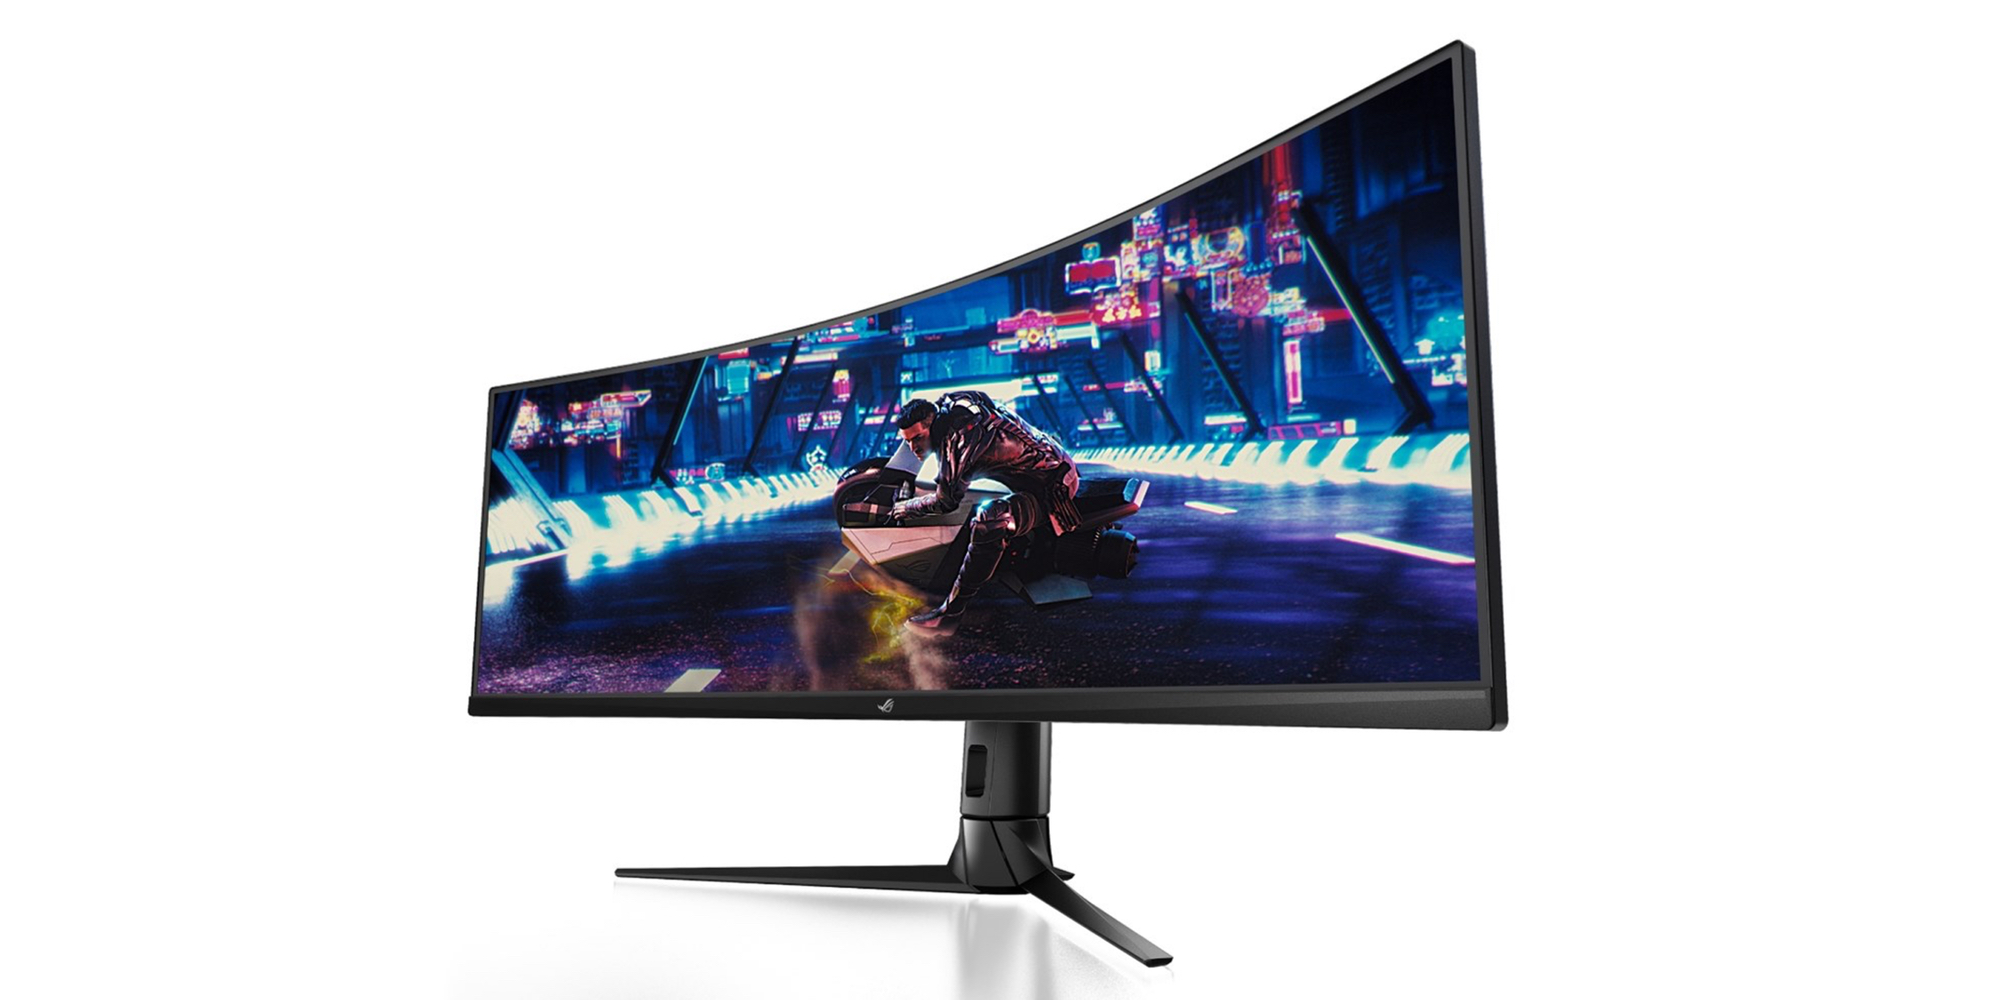 New ASUS 49-inch UltraWide Monitor